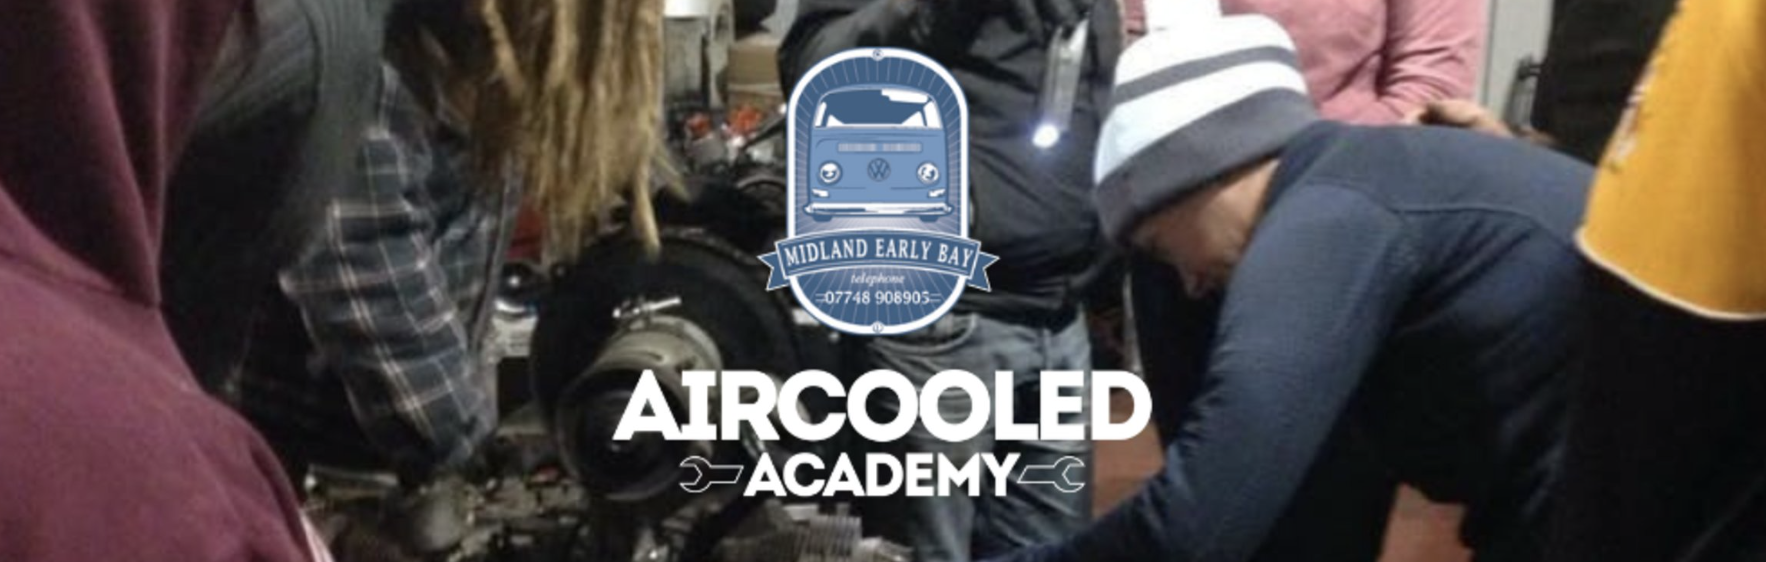 Aircooled Workshop Level 1 Course